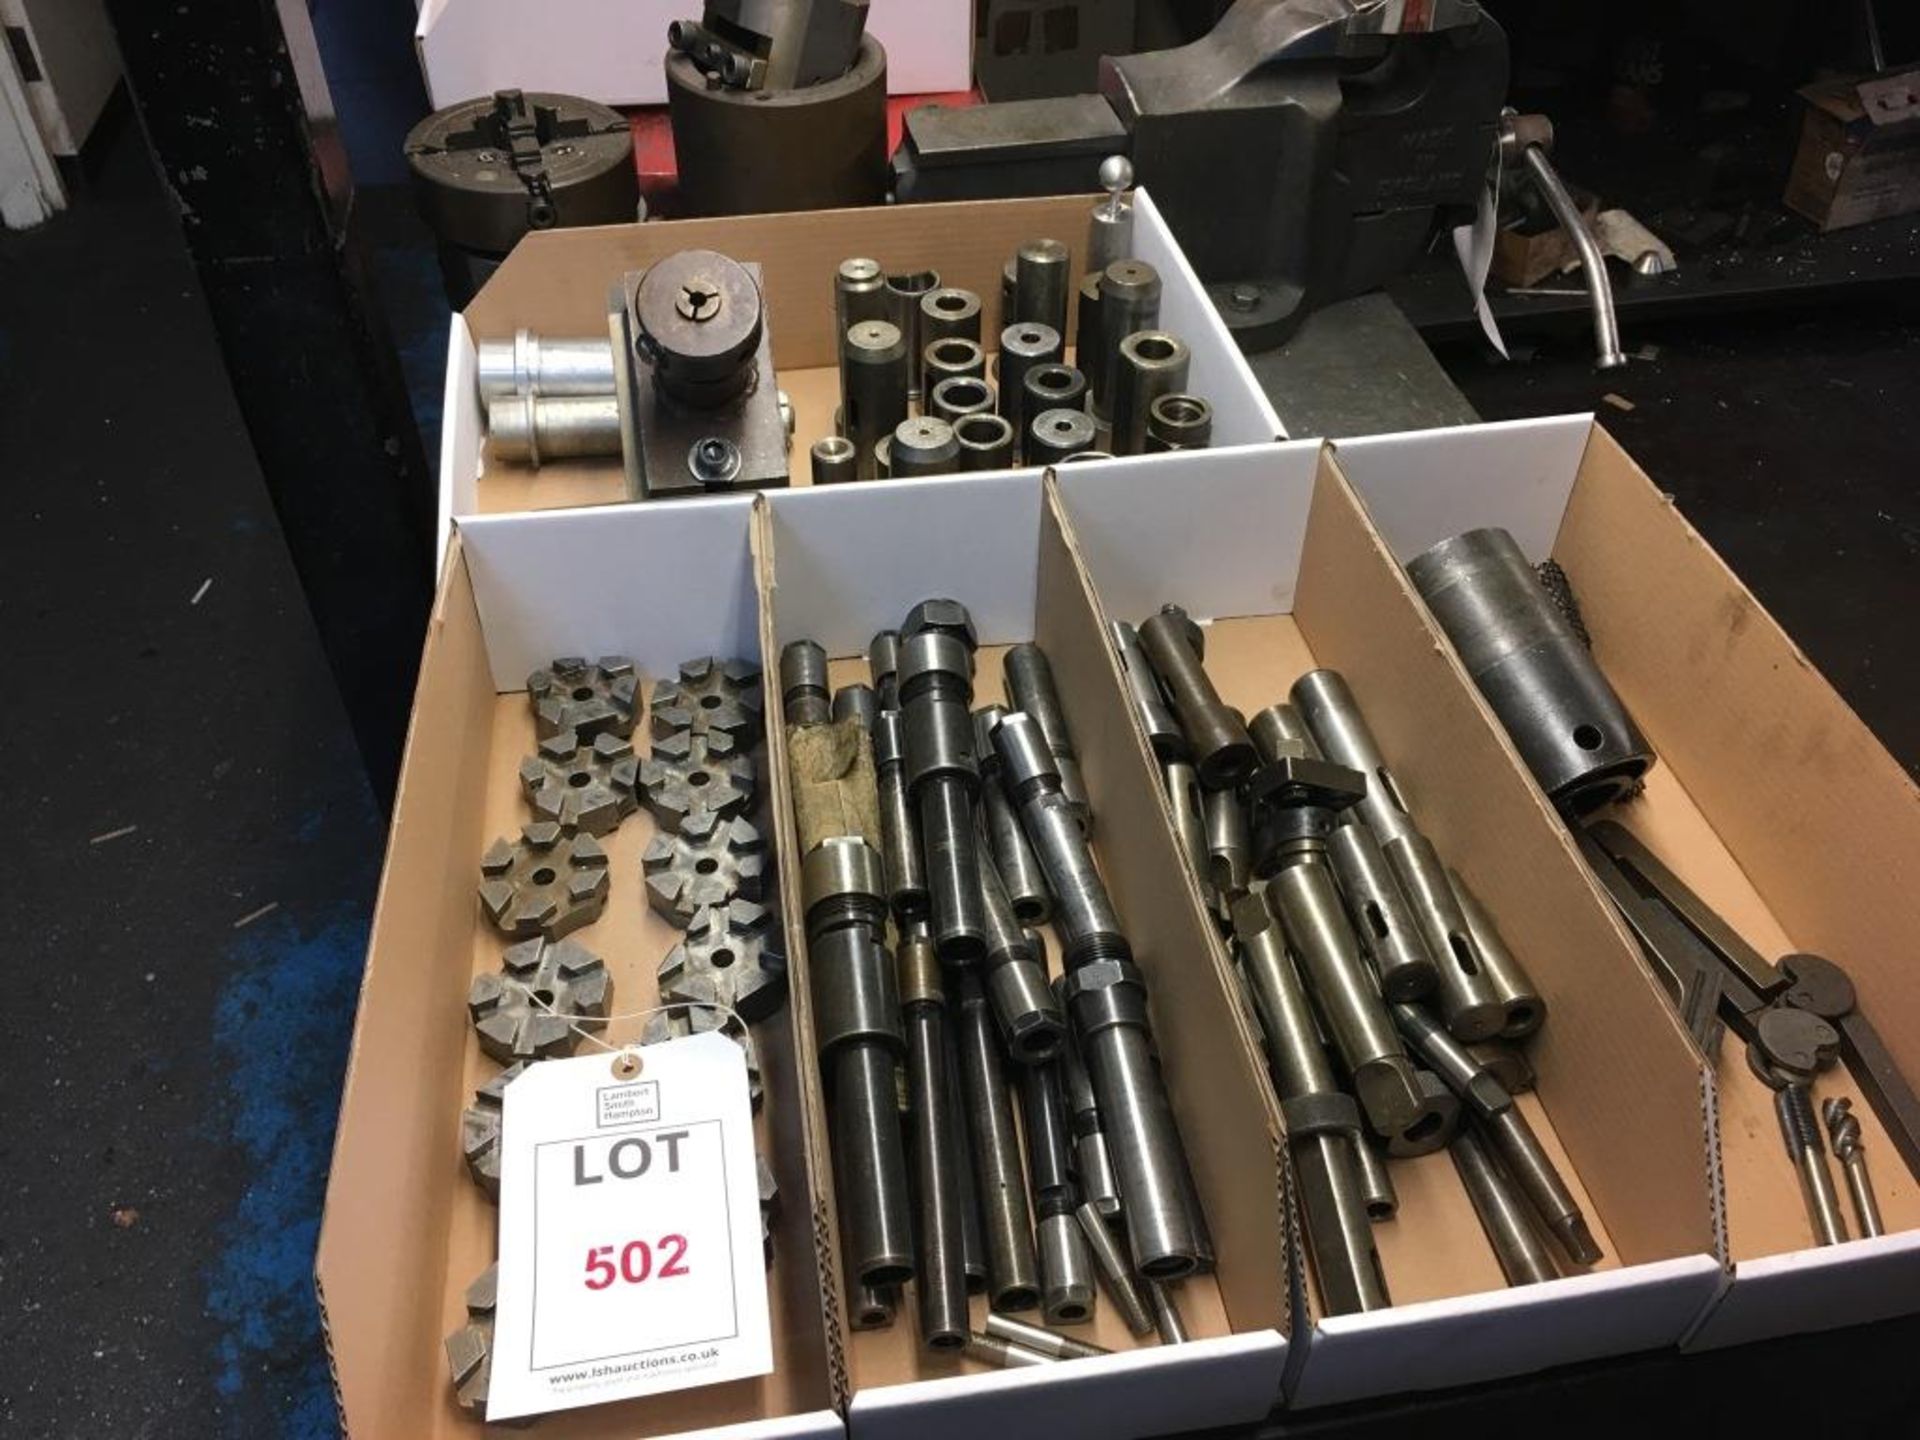 Assorted engineer's tooling, incl. drill sleeves, drill chucks, 3 jaw chucks, etc., as lotted, in